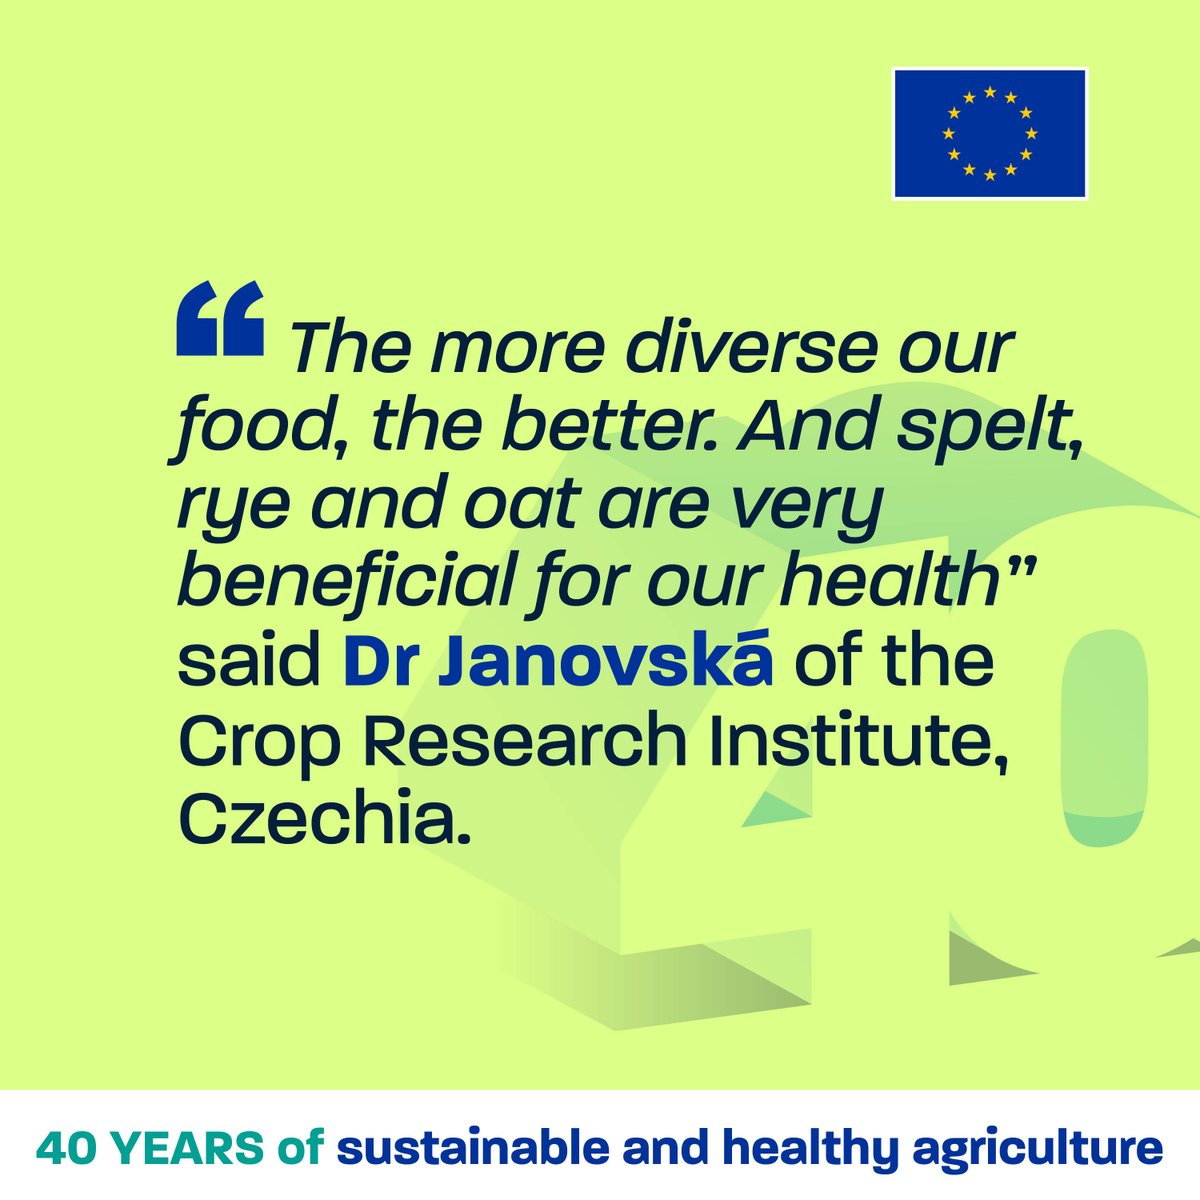 #EuropeDay is tomorrow! A good moment to spotlight some results of #EUFunded research. 🇪🇺 scientists have developed cereals that are better for #climate & health, optimising cultivation & refining processing. More here ➡️ europa.eu/!vvG6jW & below ⬇️ #ResearchImpactEU